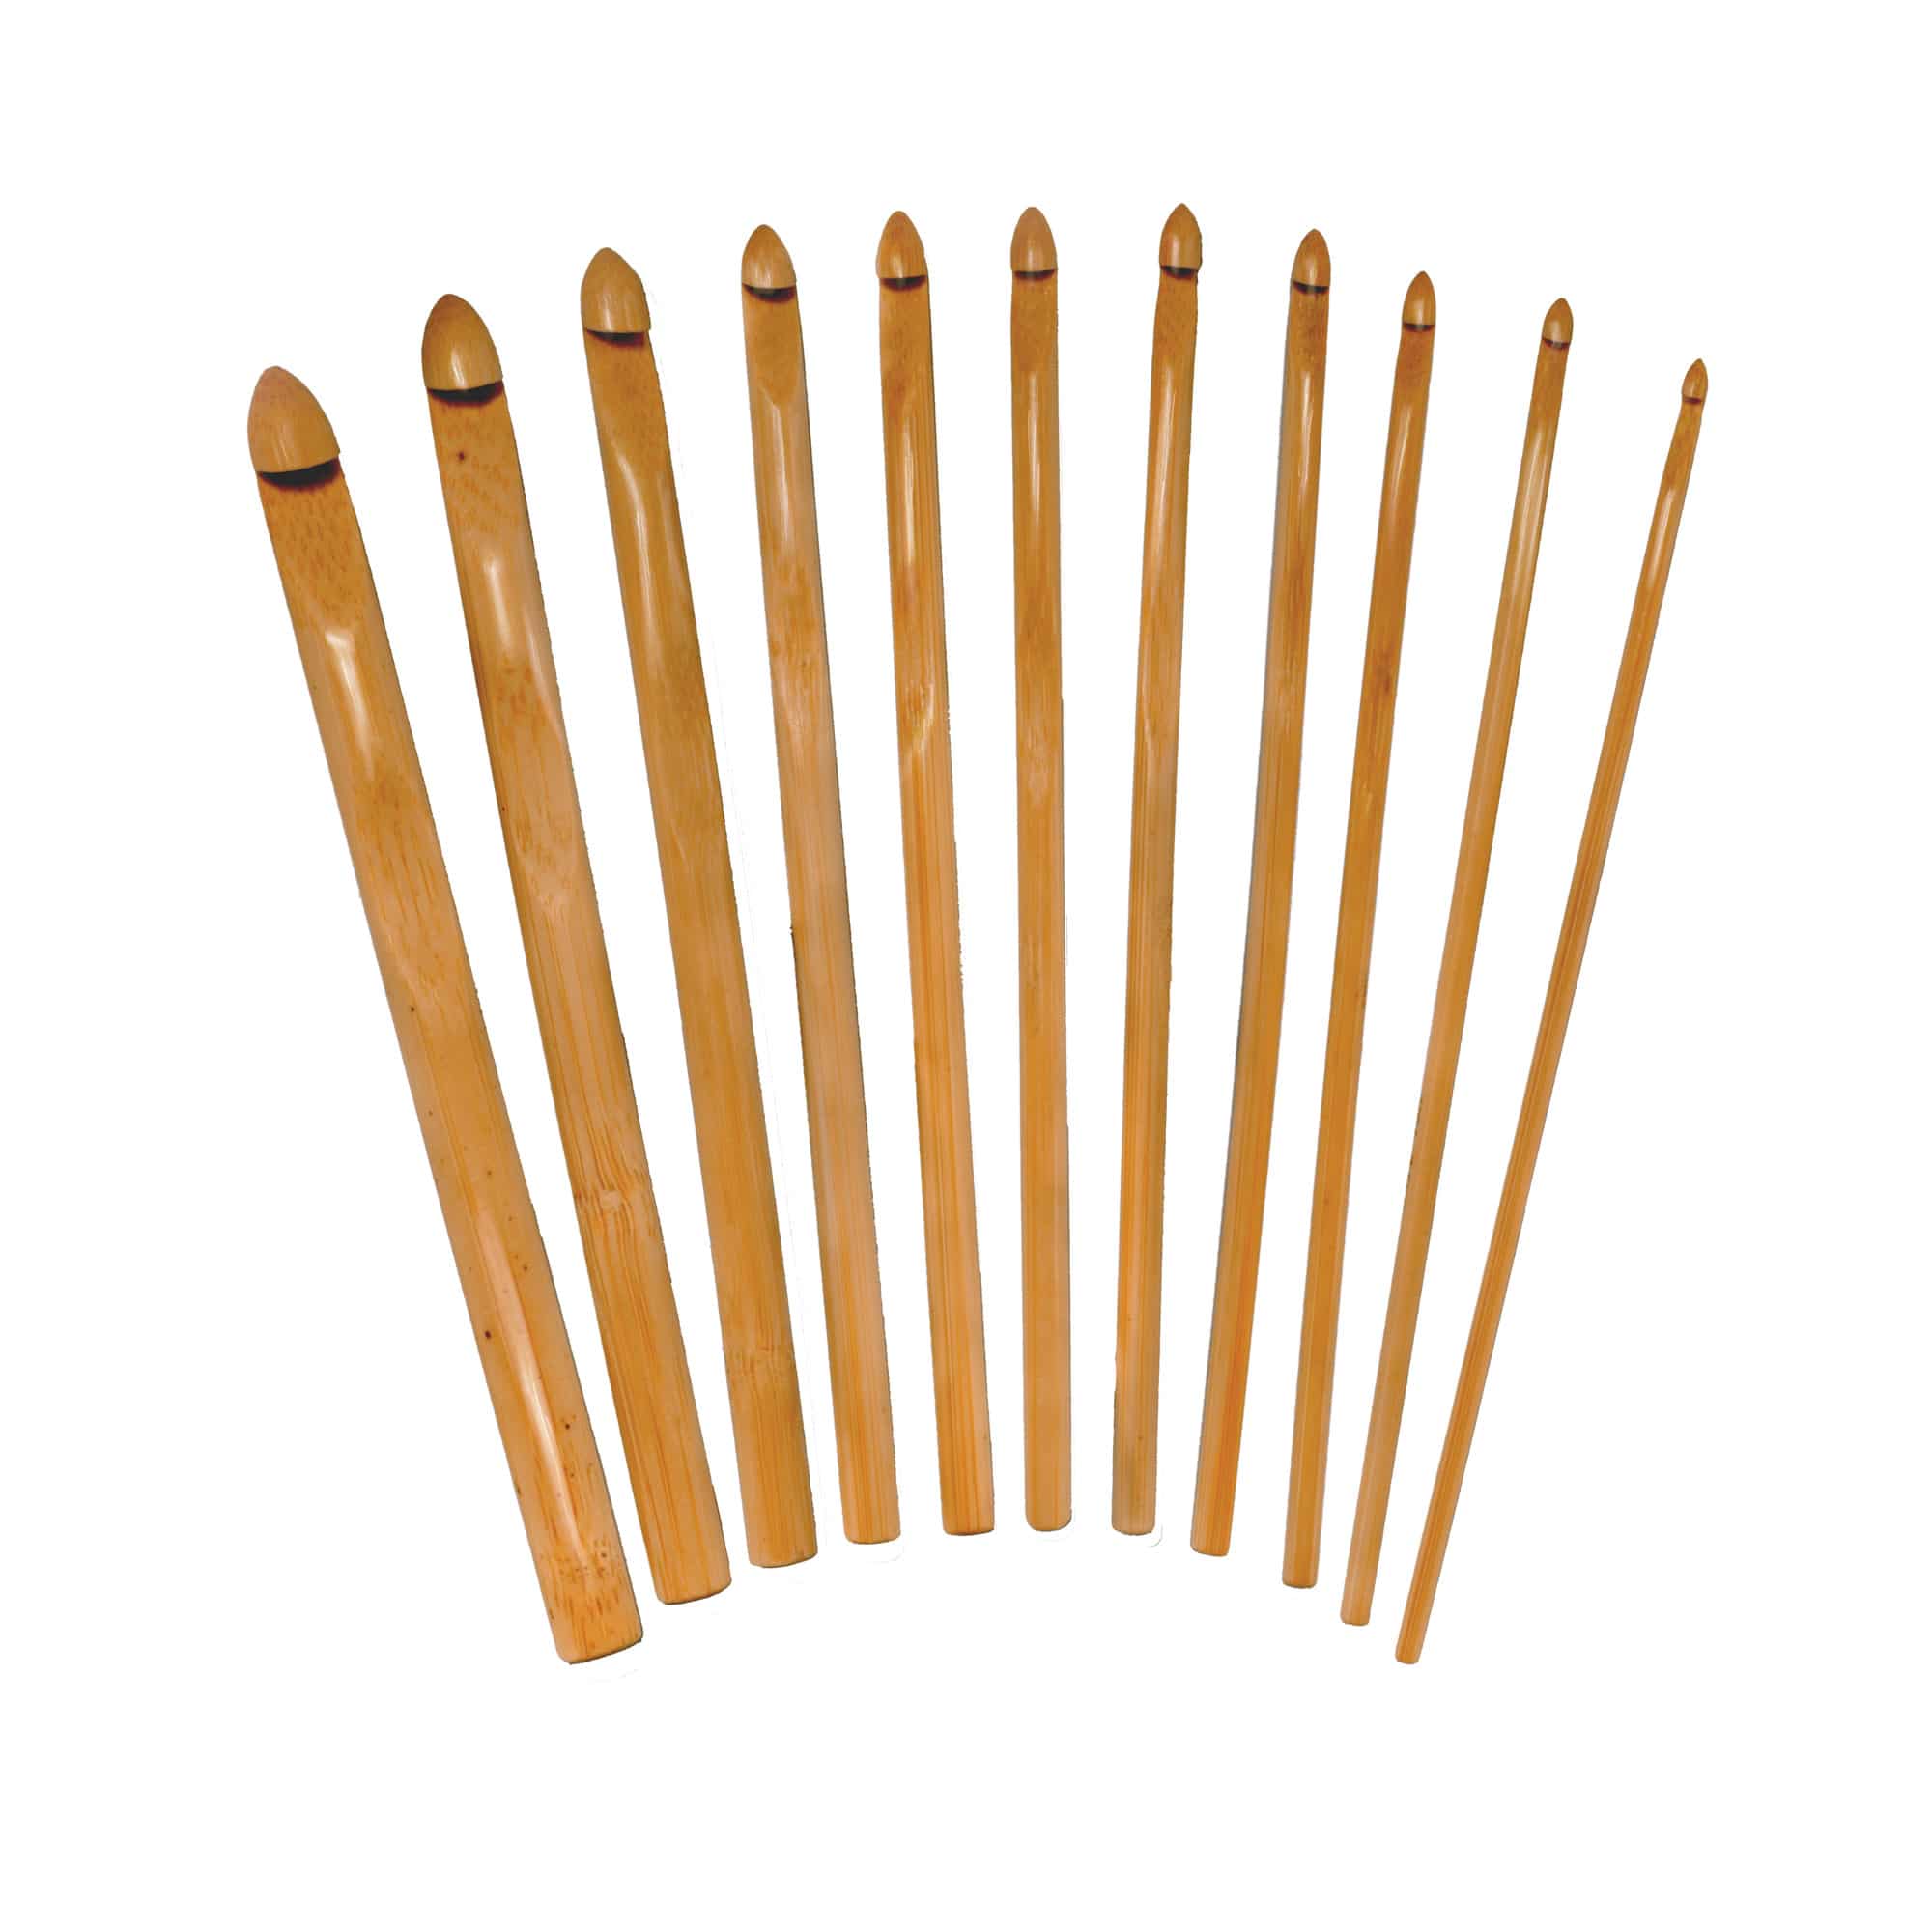 Lion BRAND Bamboo Crochet Hook Set Sizes J/10mm to N/13mm 023032061122 for  sale online